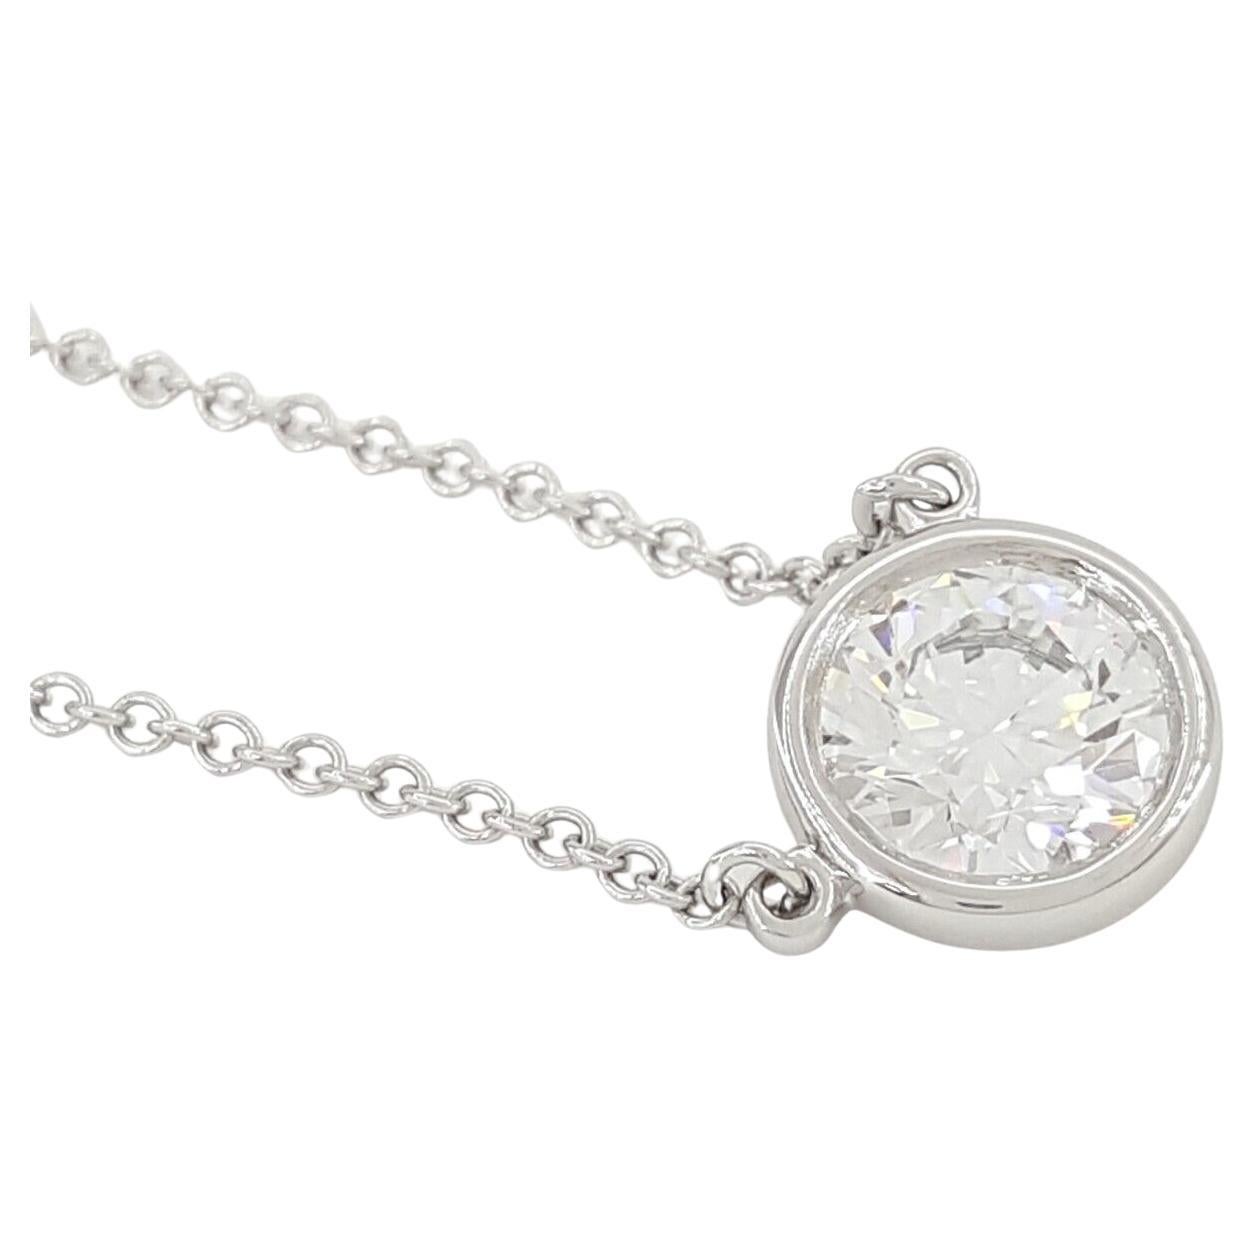 Elsa Peretti Diamond By The Yard Necklace from Tiffany&Co. Necklace